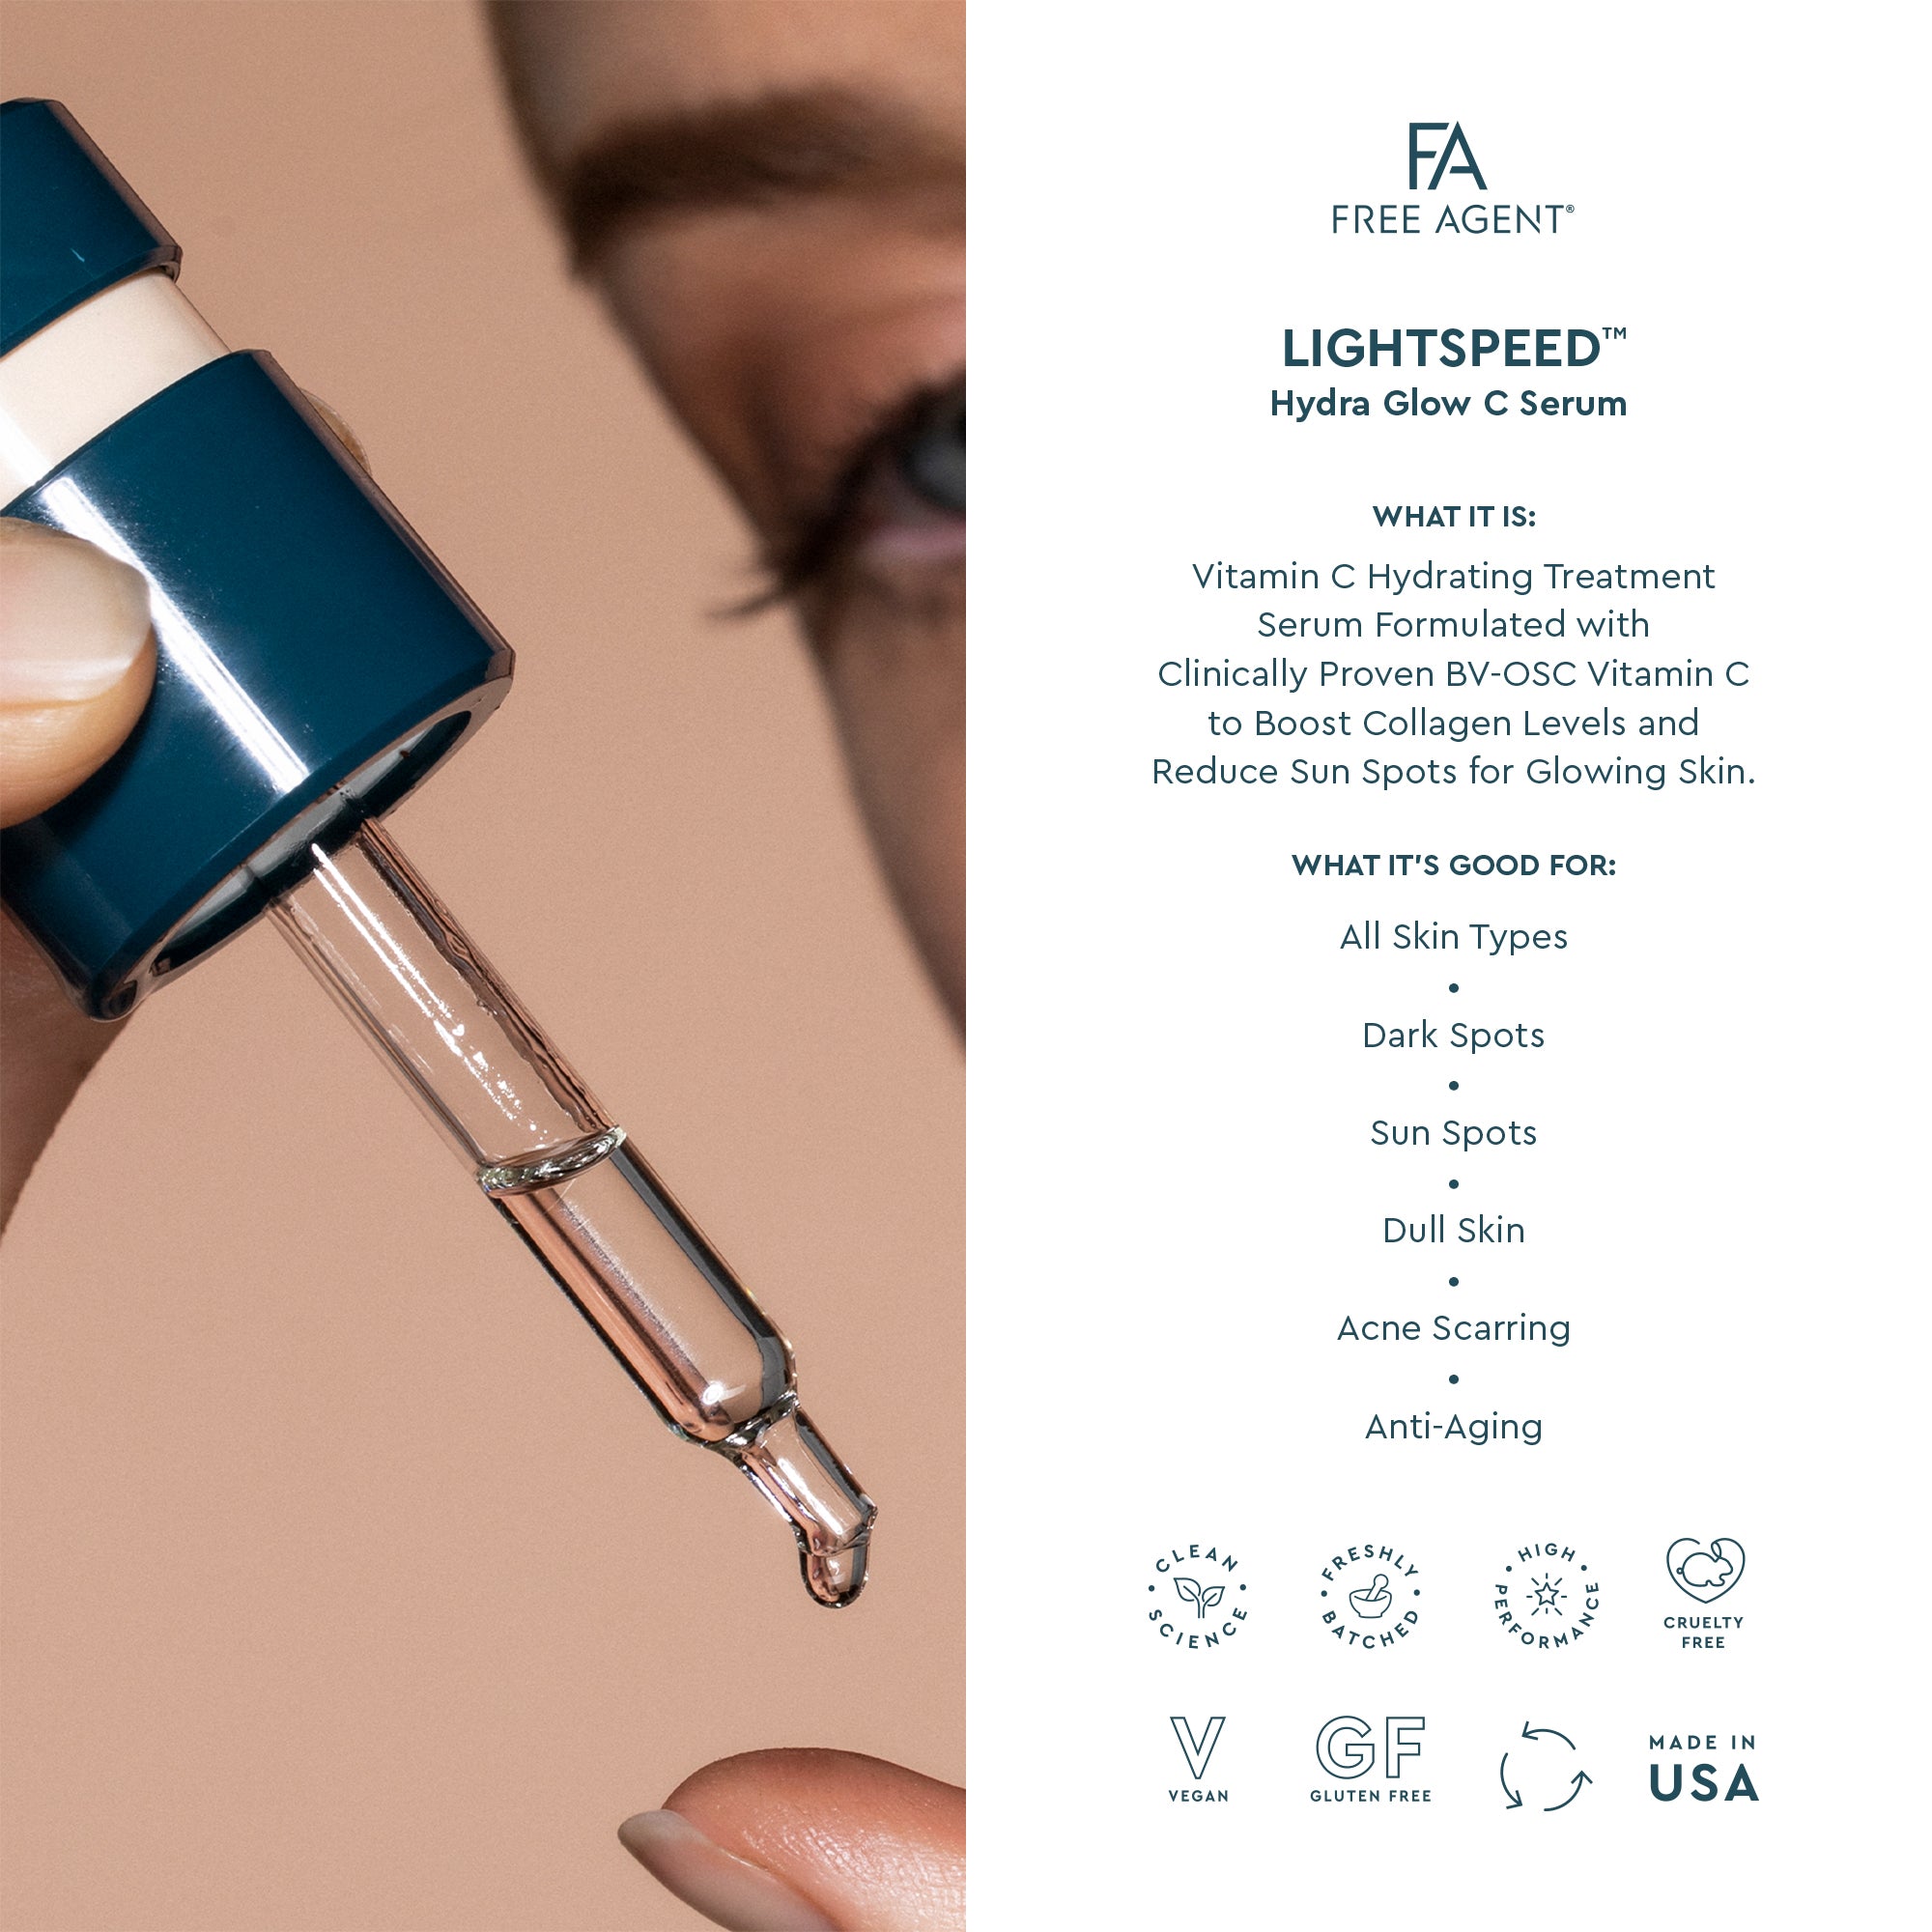 LAB DISCOVERY KIT <br> Two Week Supply Of <br>LIGHTSPEED&trade;+ FLASH FORWARD&trade;